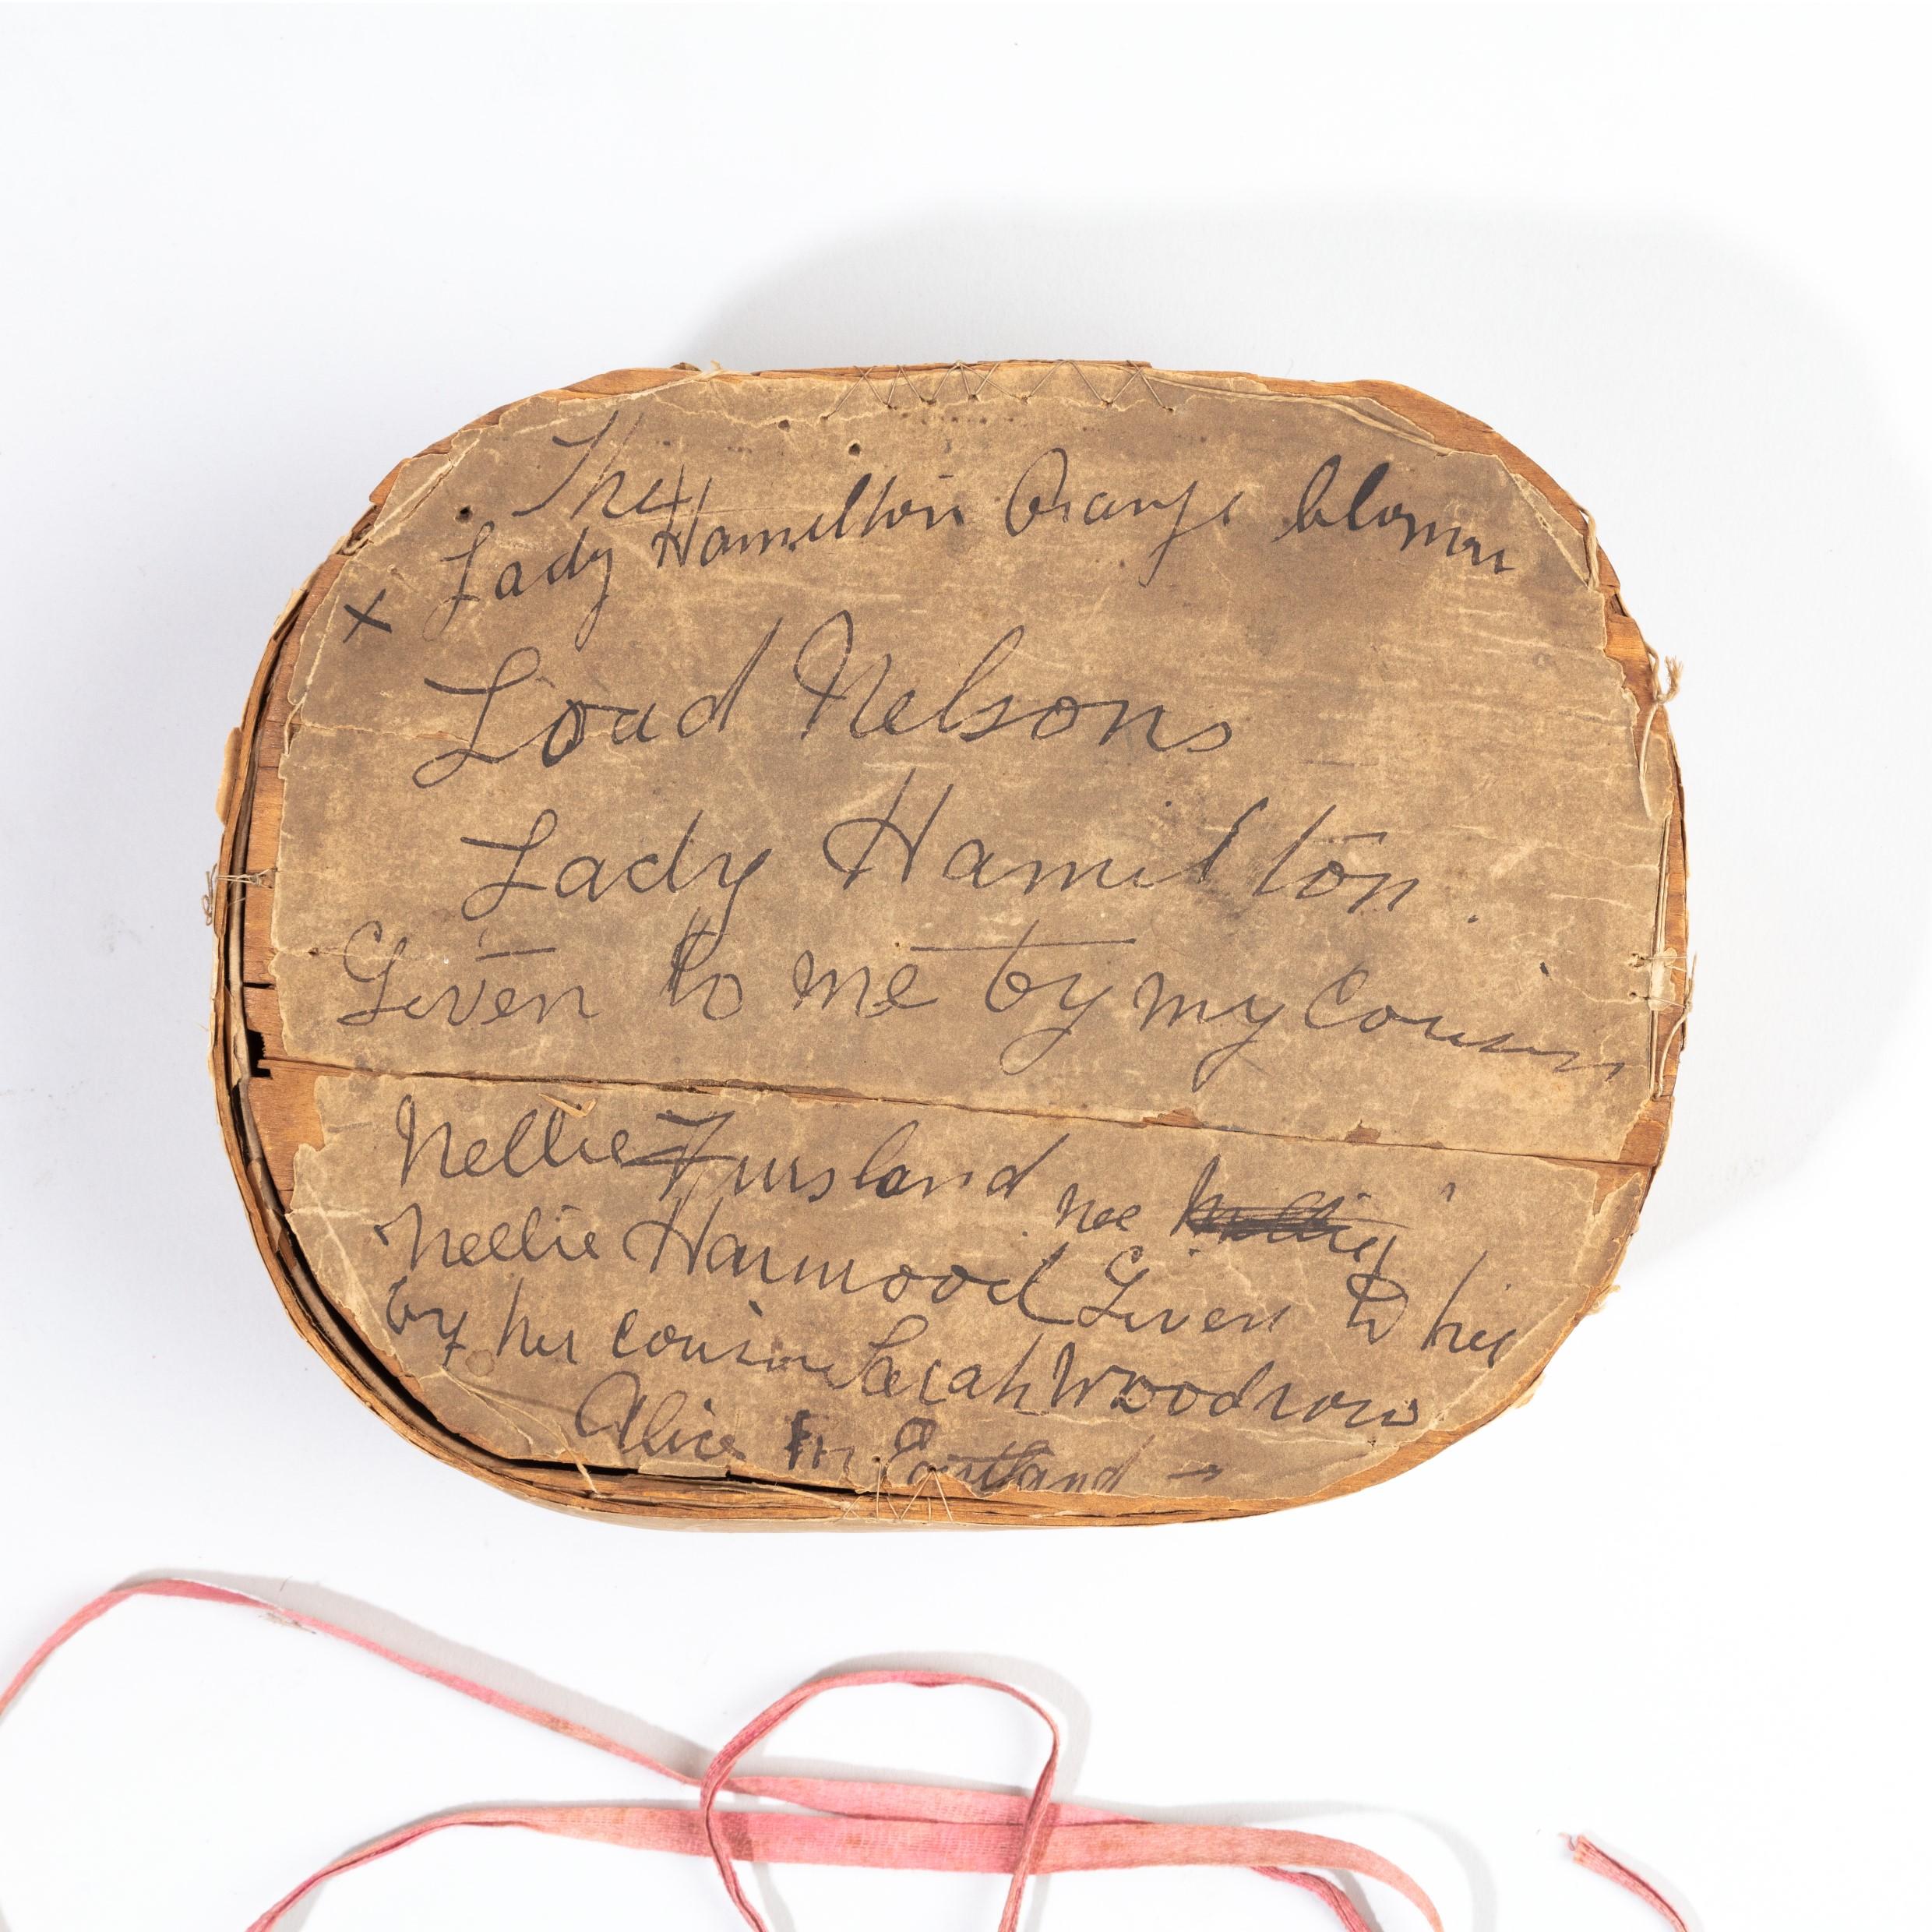 This charming keepsake comprises an oval paper lined wooden box and lid, formally a pill or pantry box, held together with a pink ribbon, inscribed on the lid The Lady Hamilton’s Orange blossom. Lord Nelsons. Lady Hamilton. Given to me by my cousin